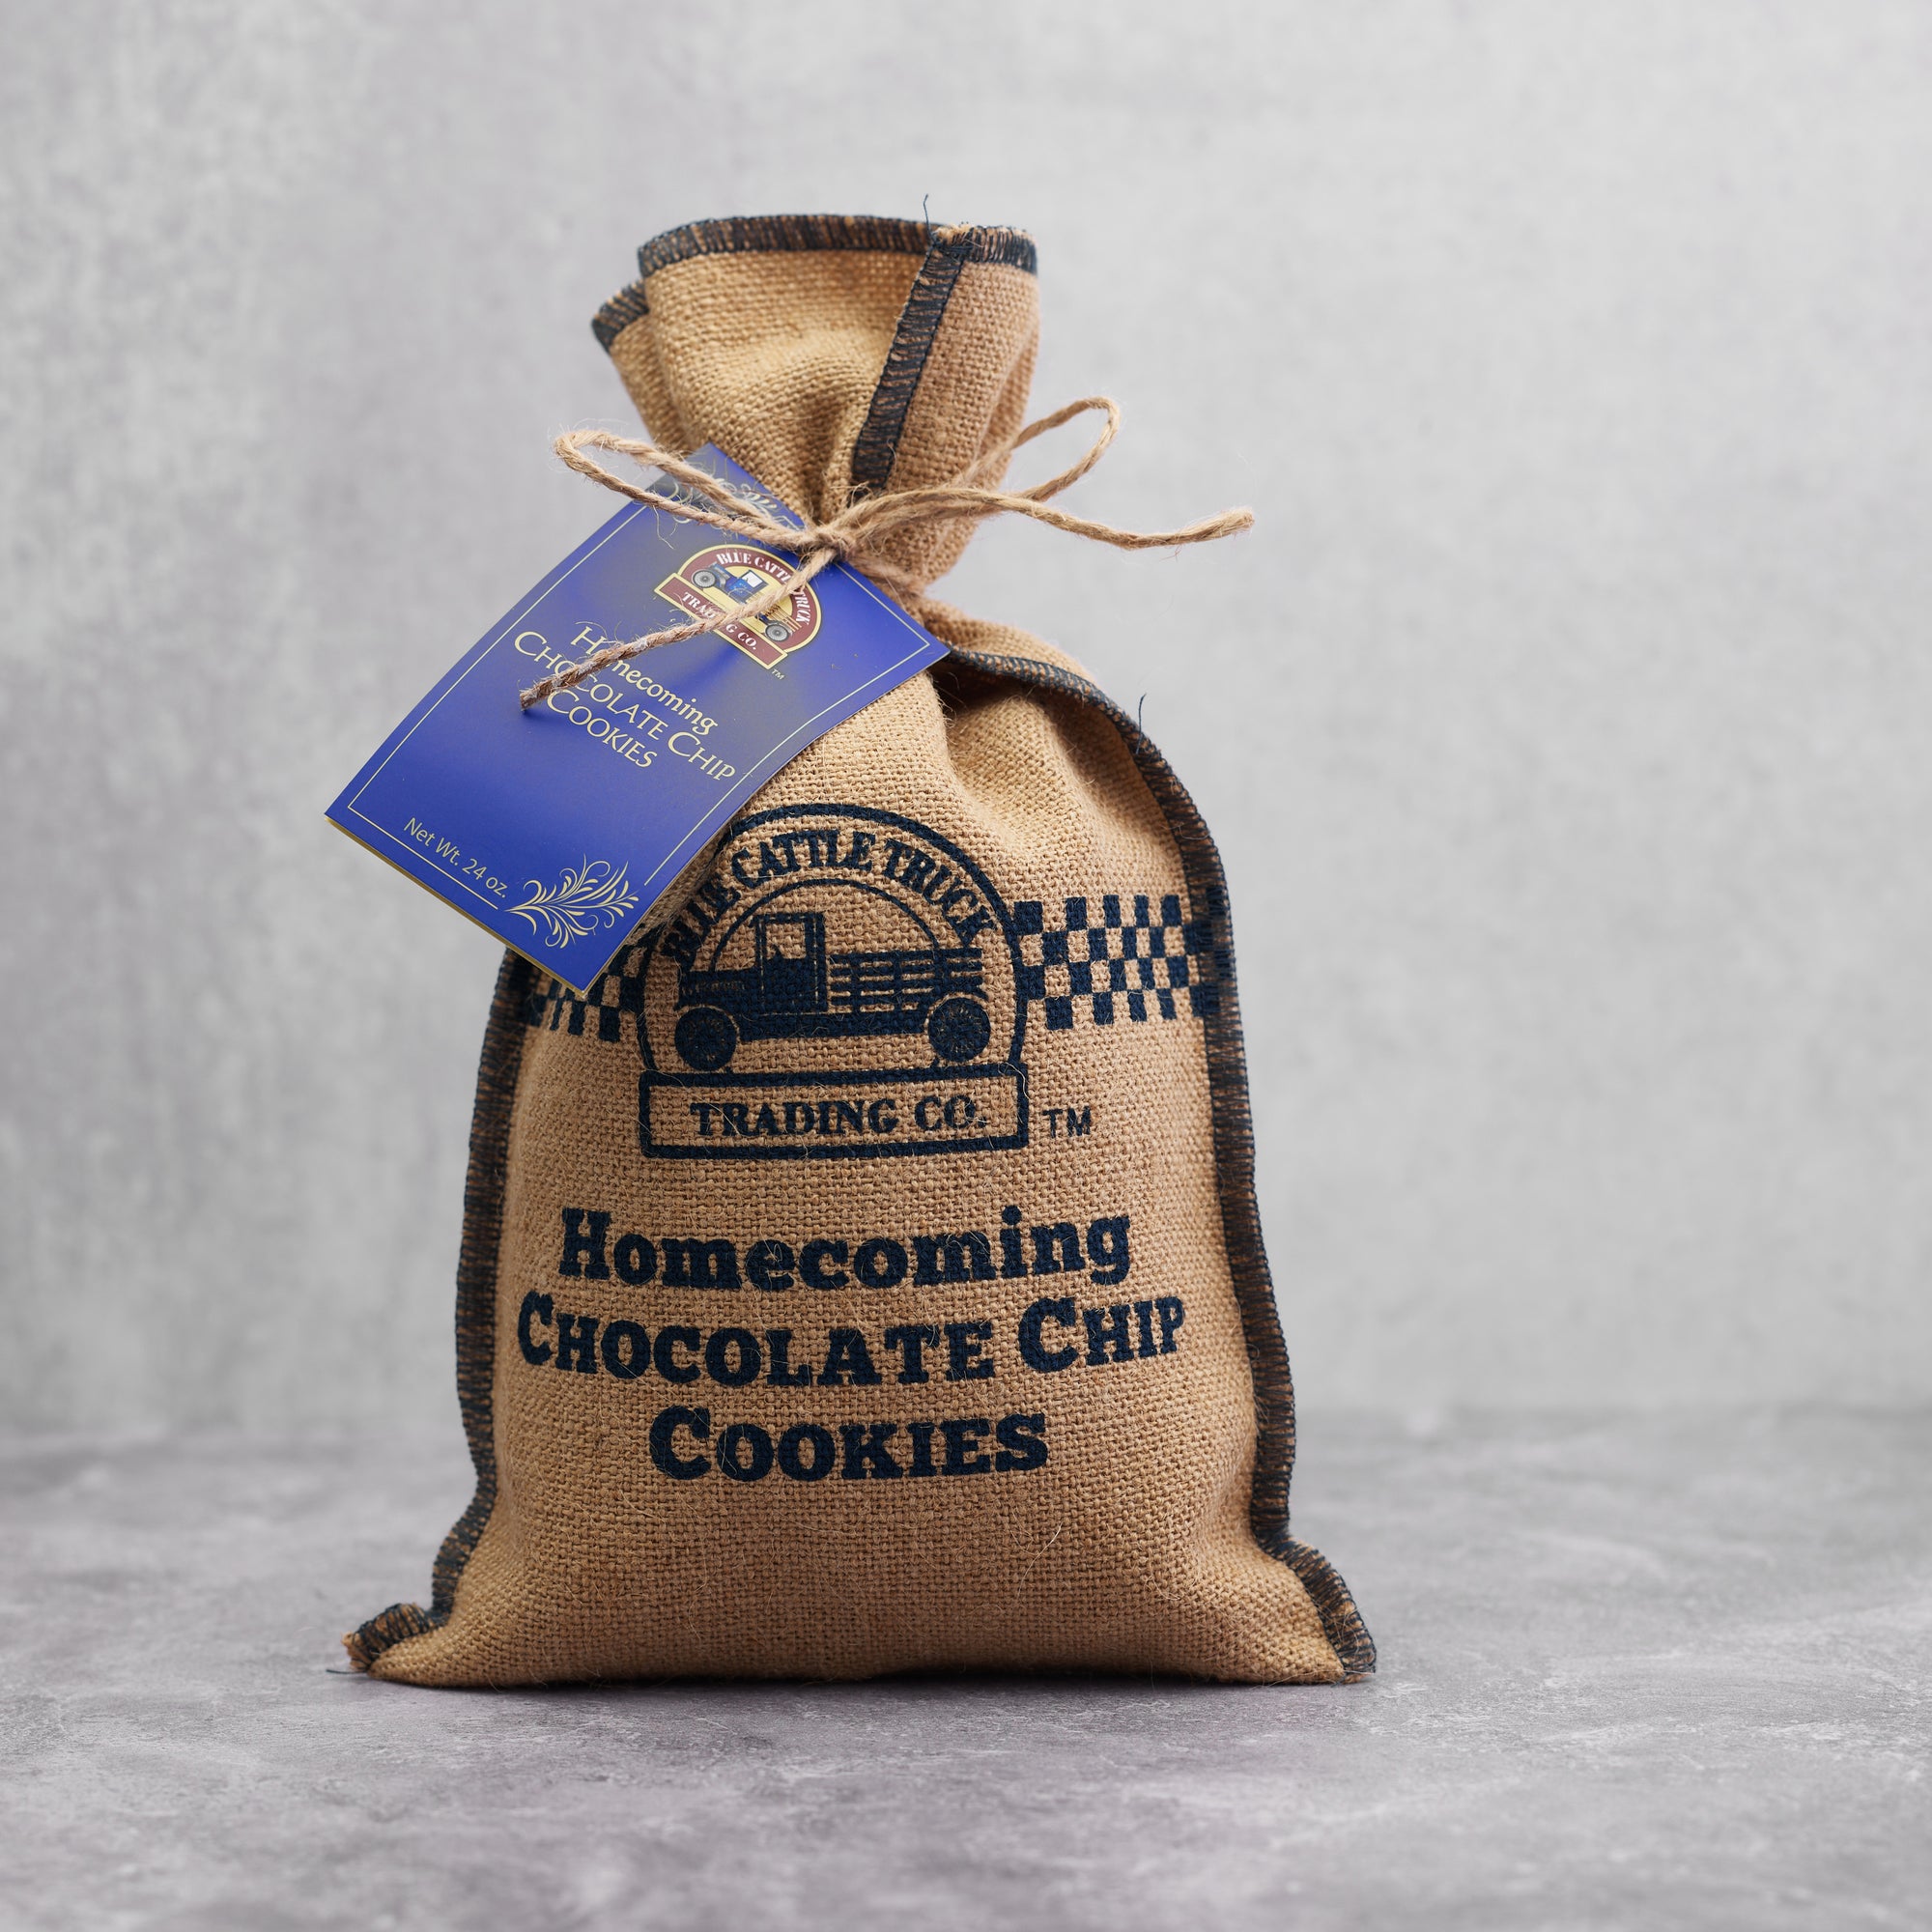 Homecoming Chocolate Chip Cookies Mix